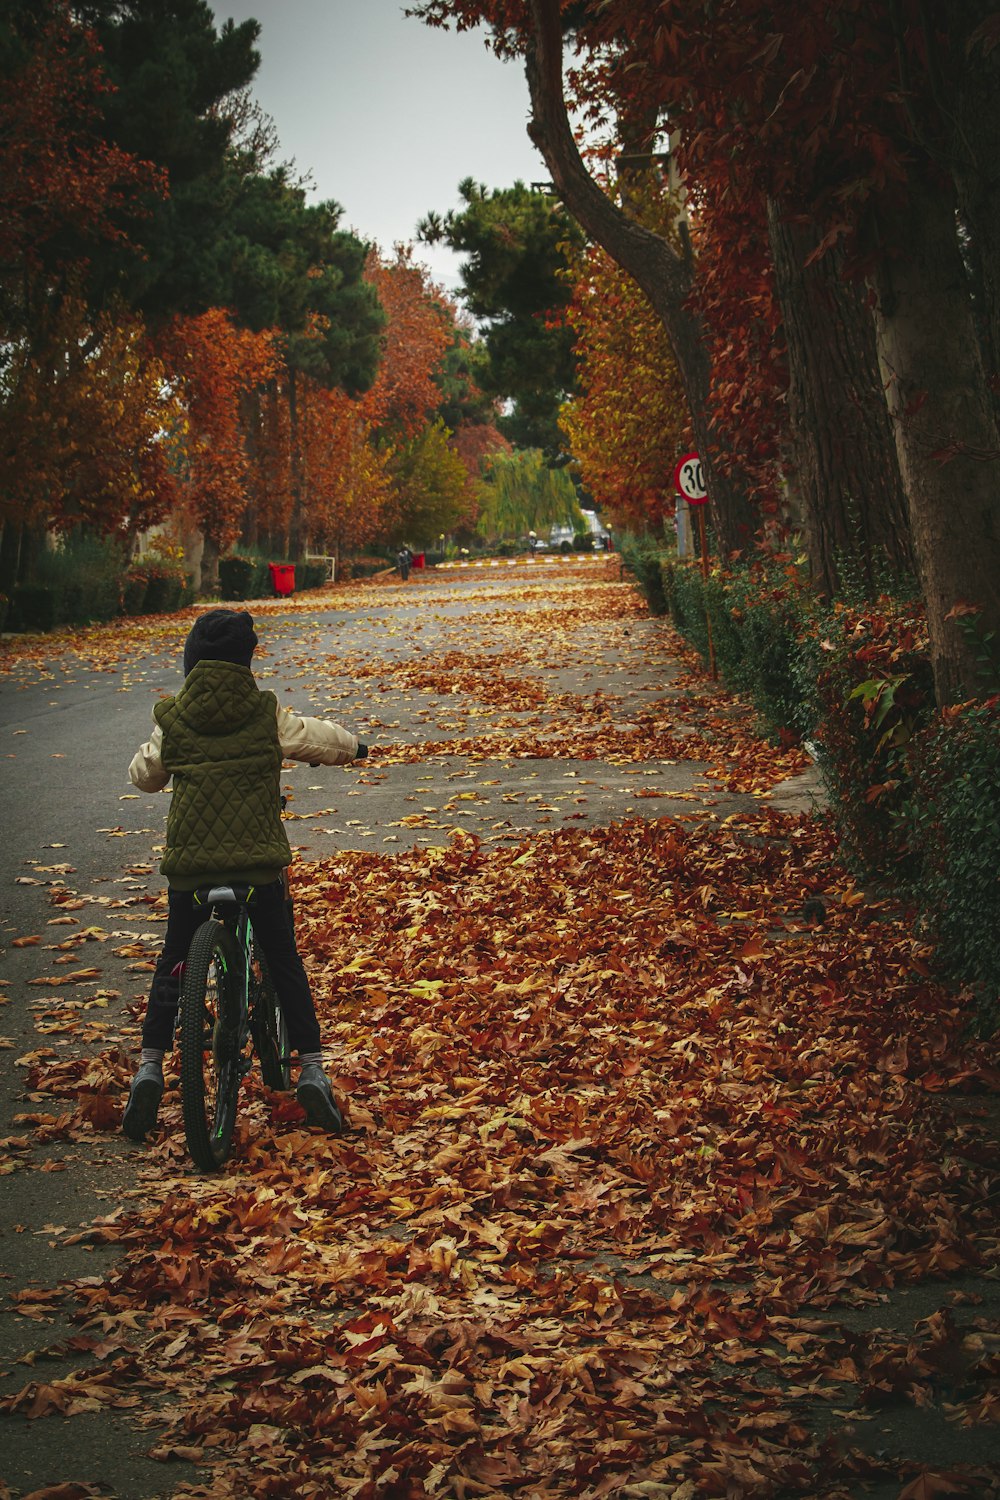 a person riding a bike down a leaf covered road